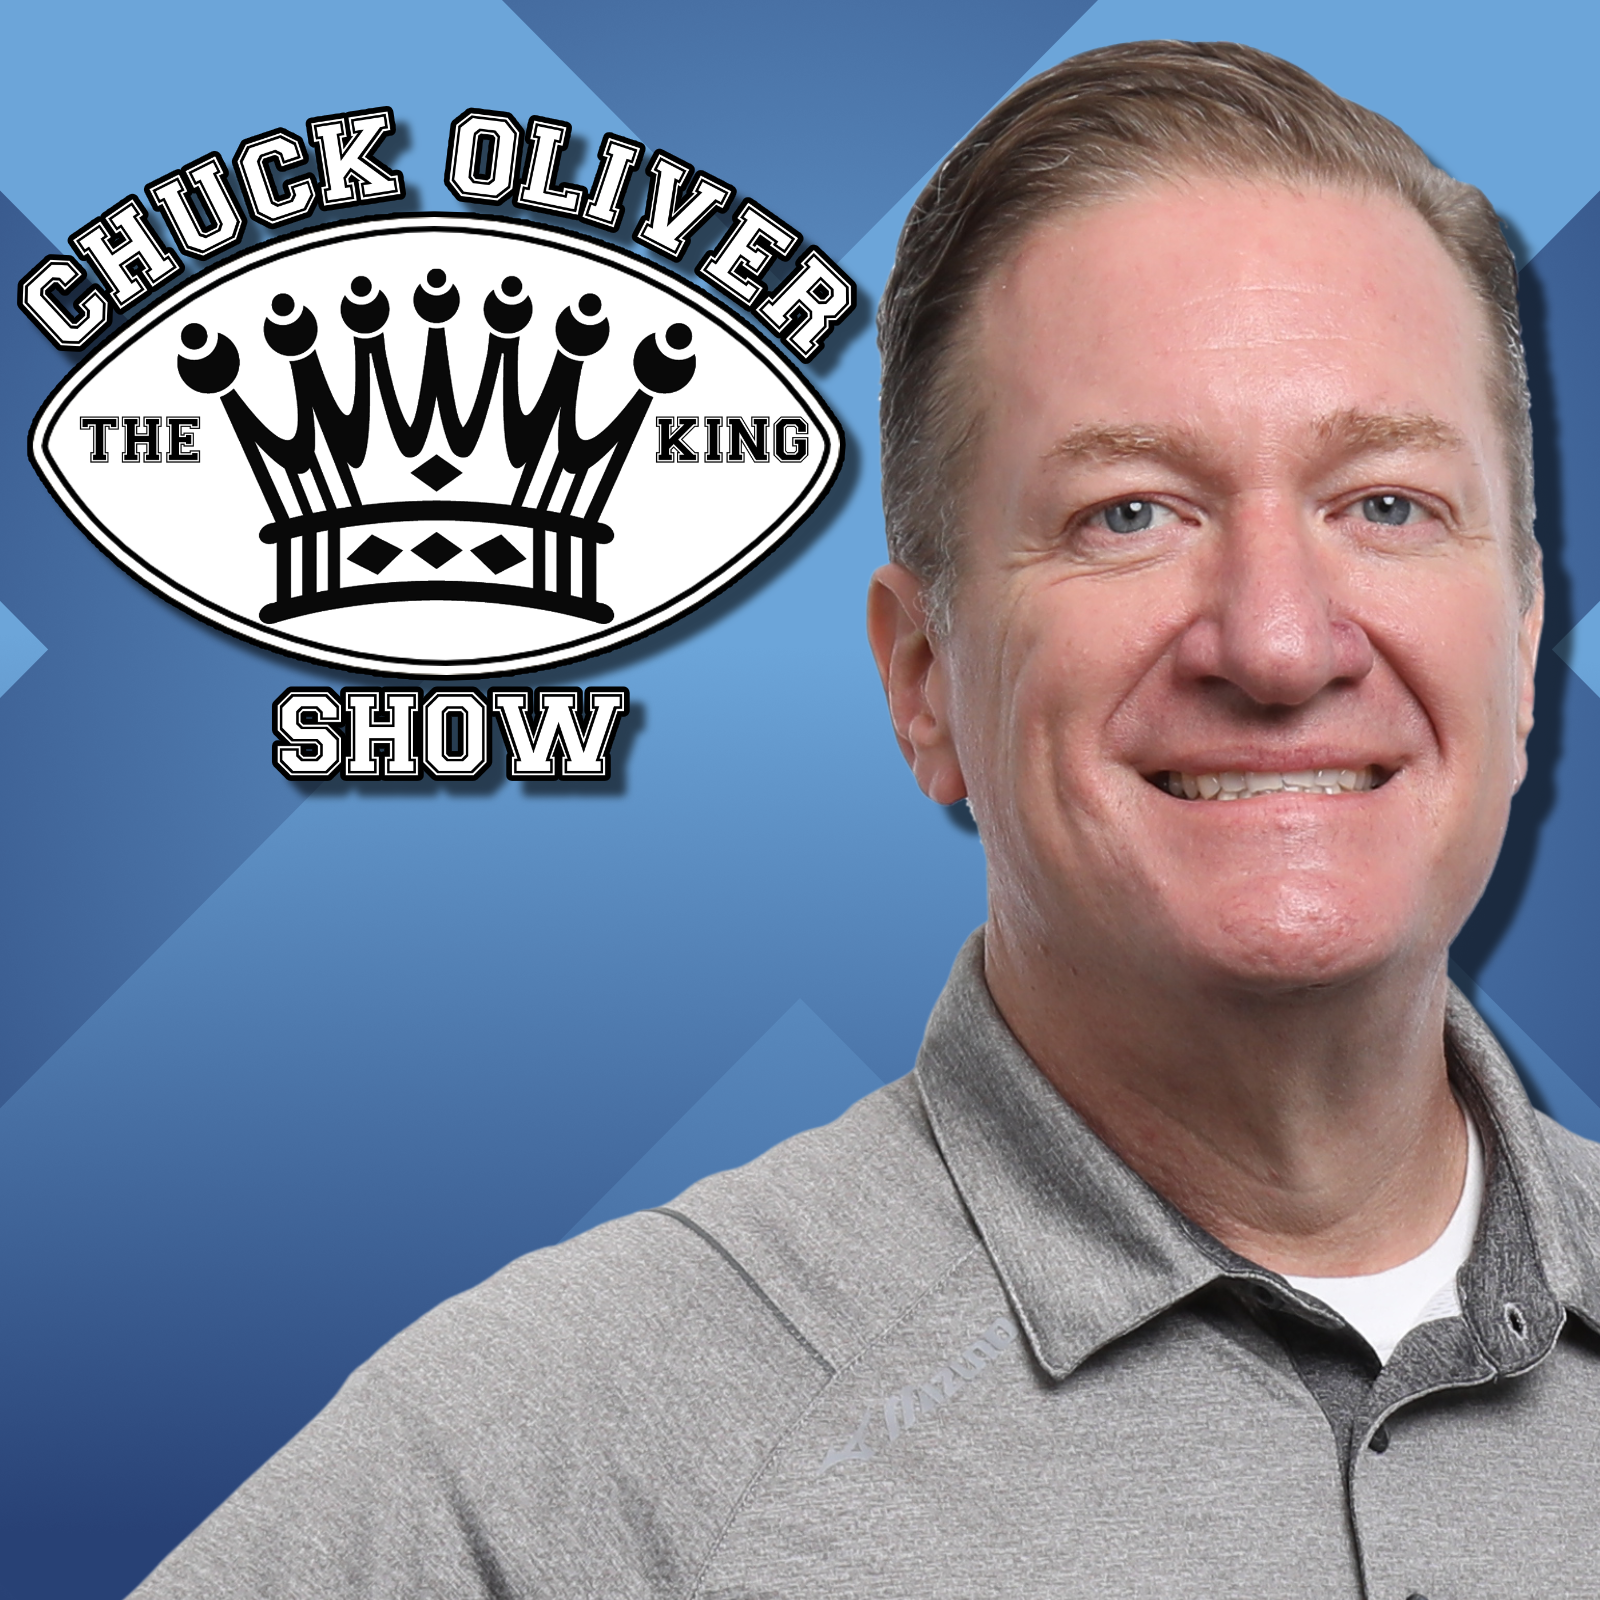 CHUCK OLIVER SHOW 6-18 FRIDAY HOUR 1